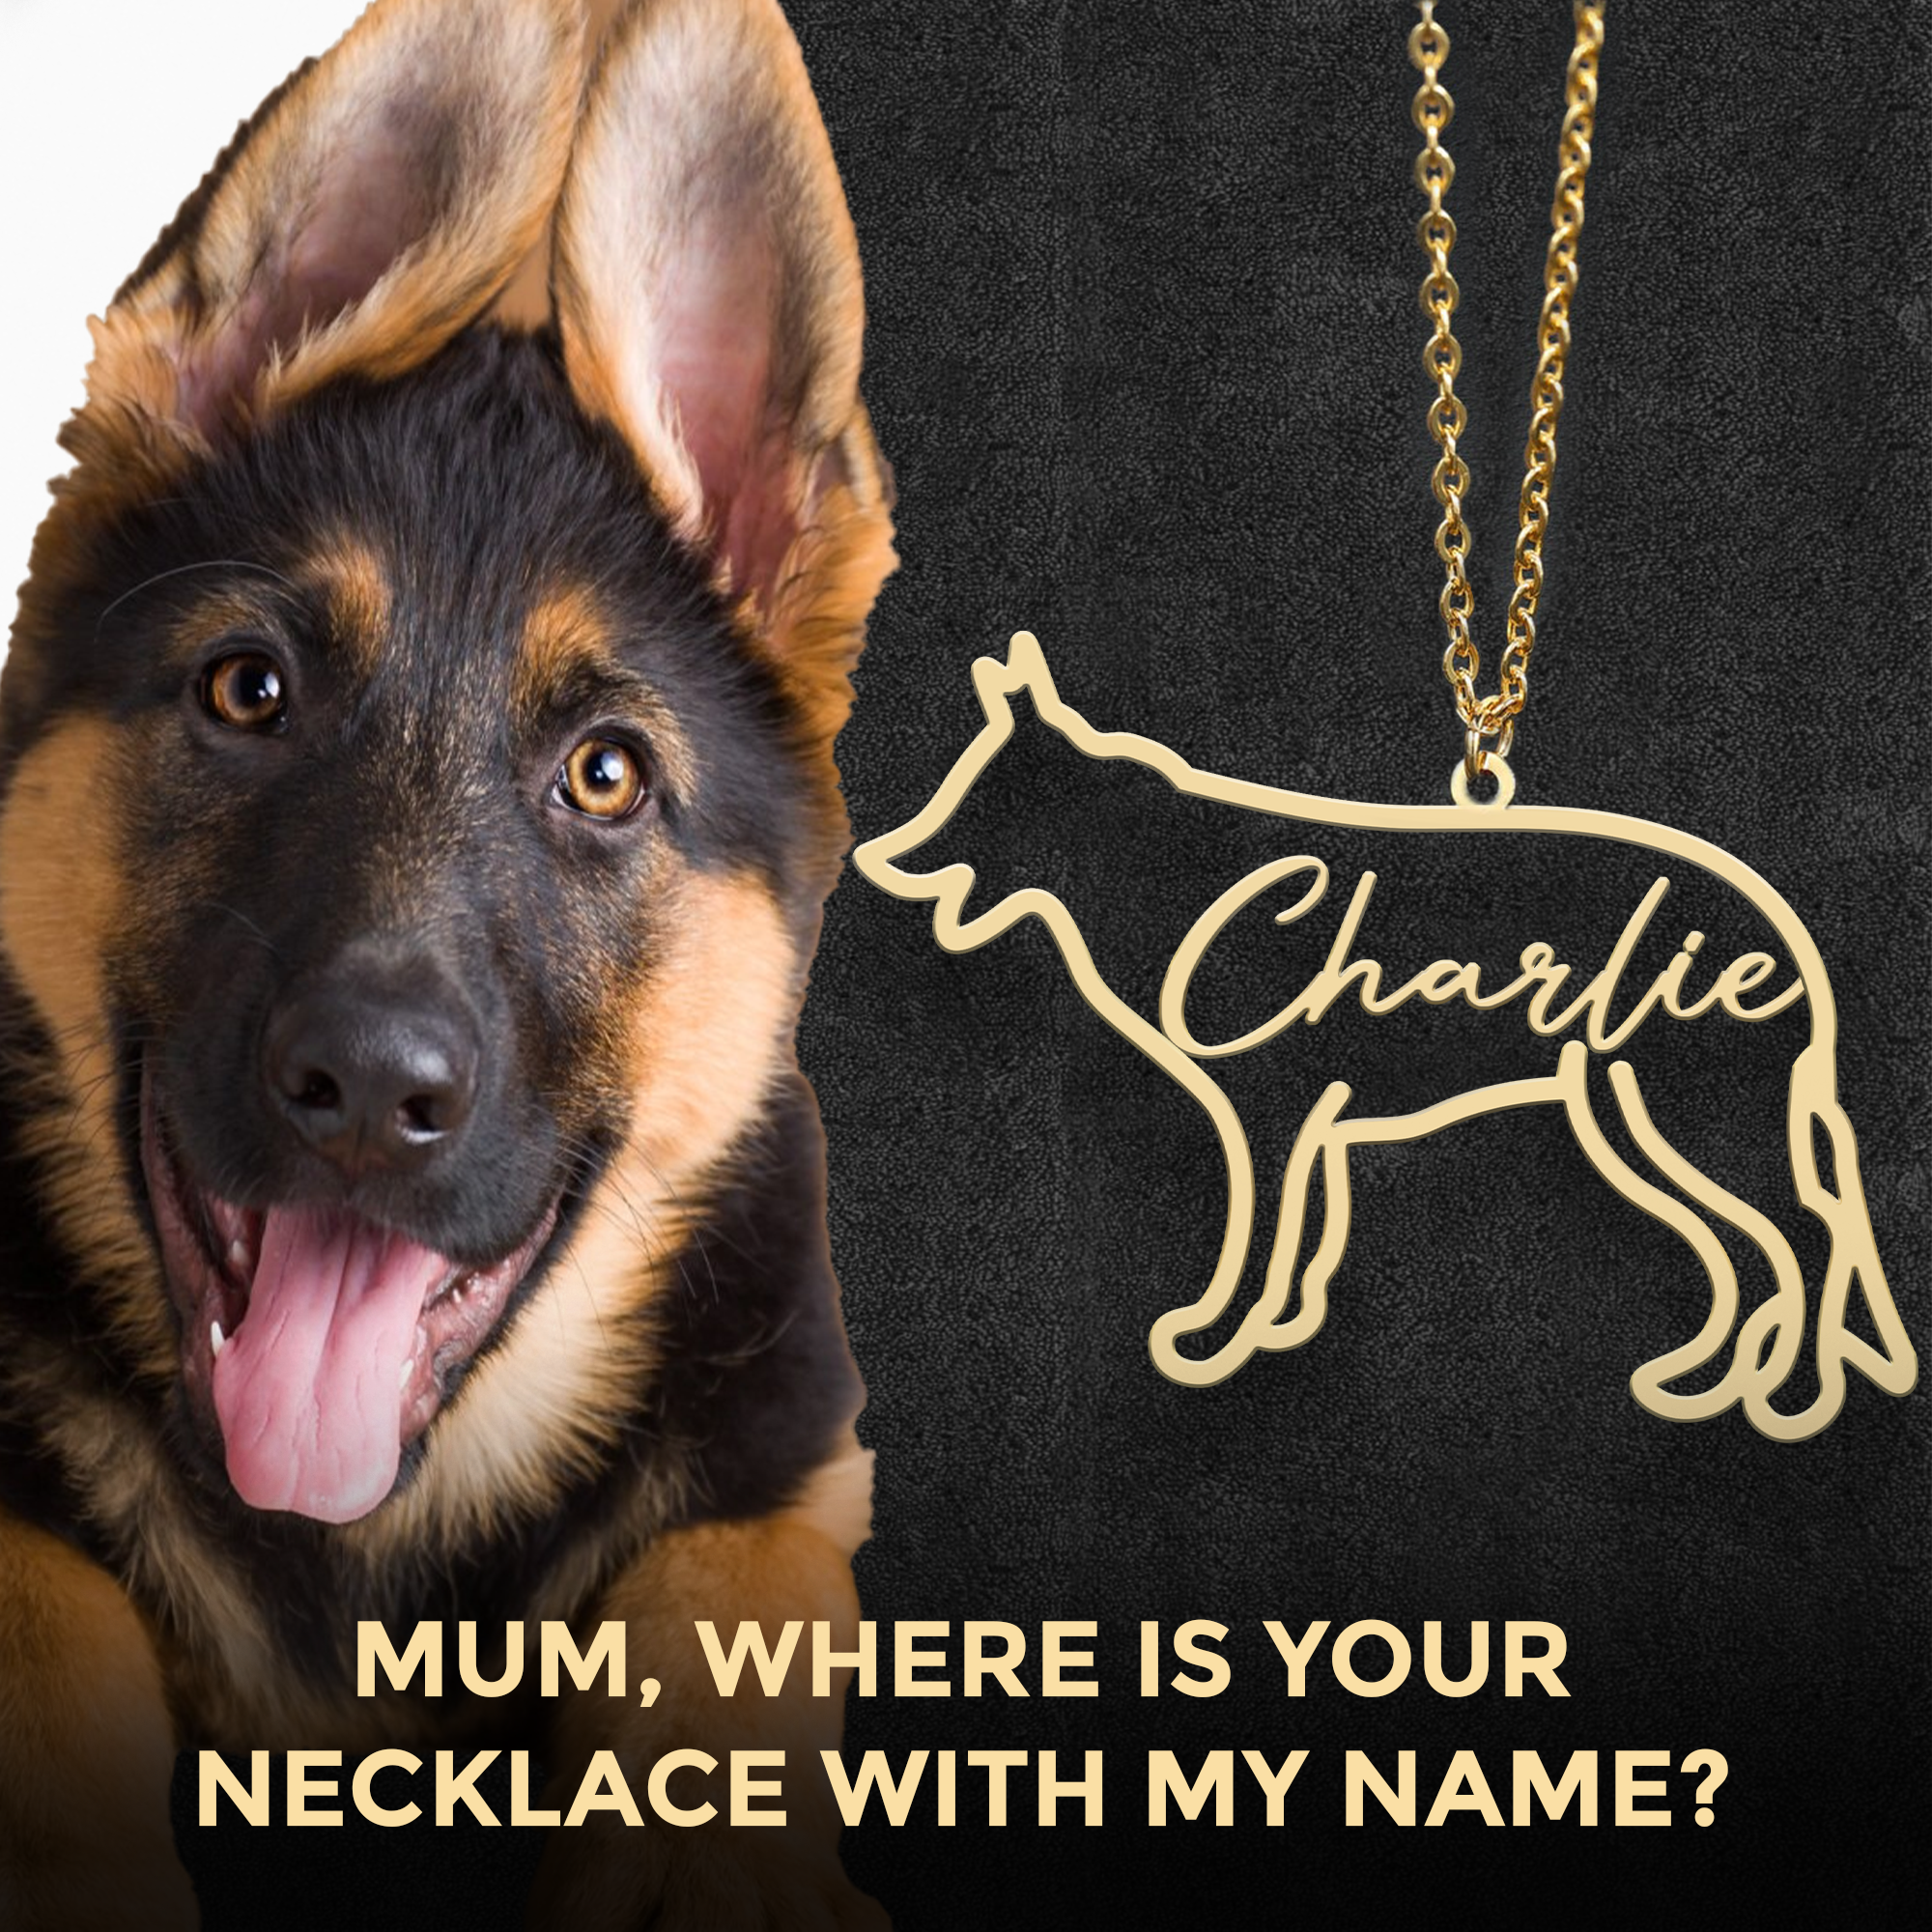 Personalized necklace with your dog's breed and name